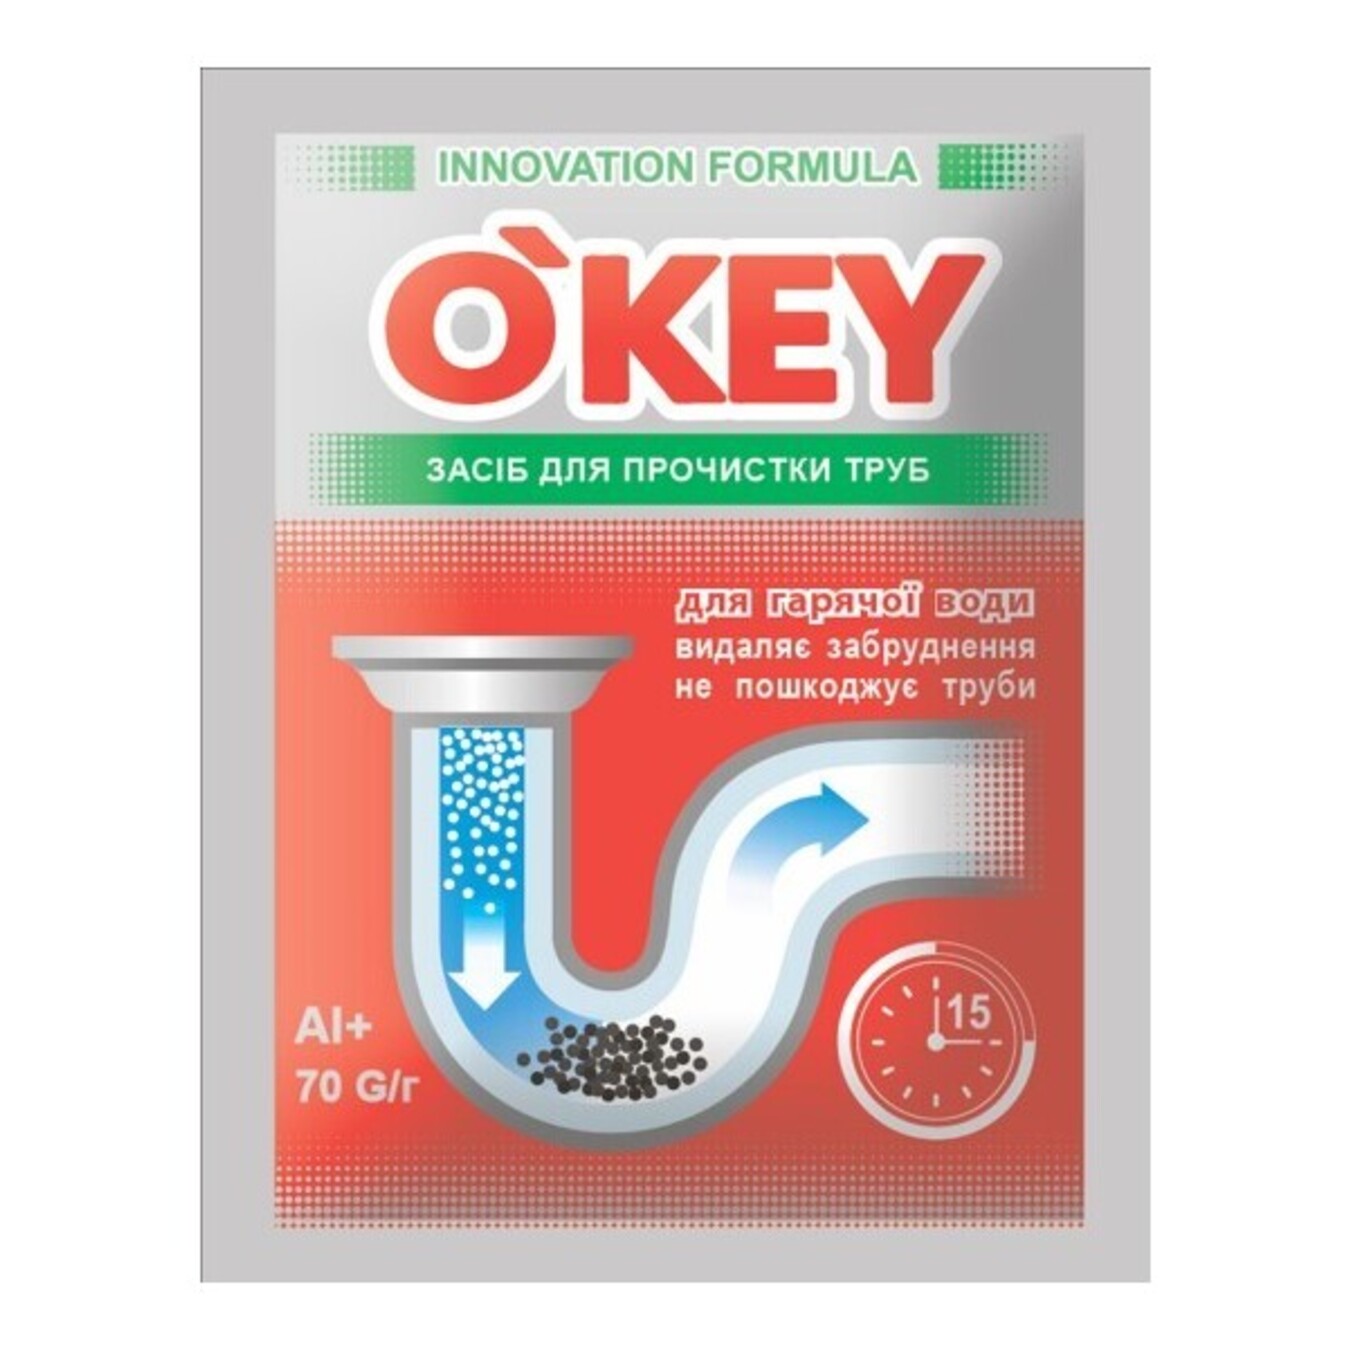 OKey means for cleaning pipes in hot water granulated 70g